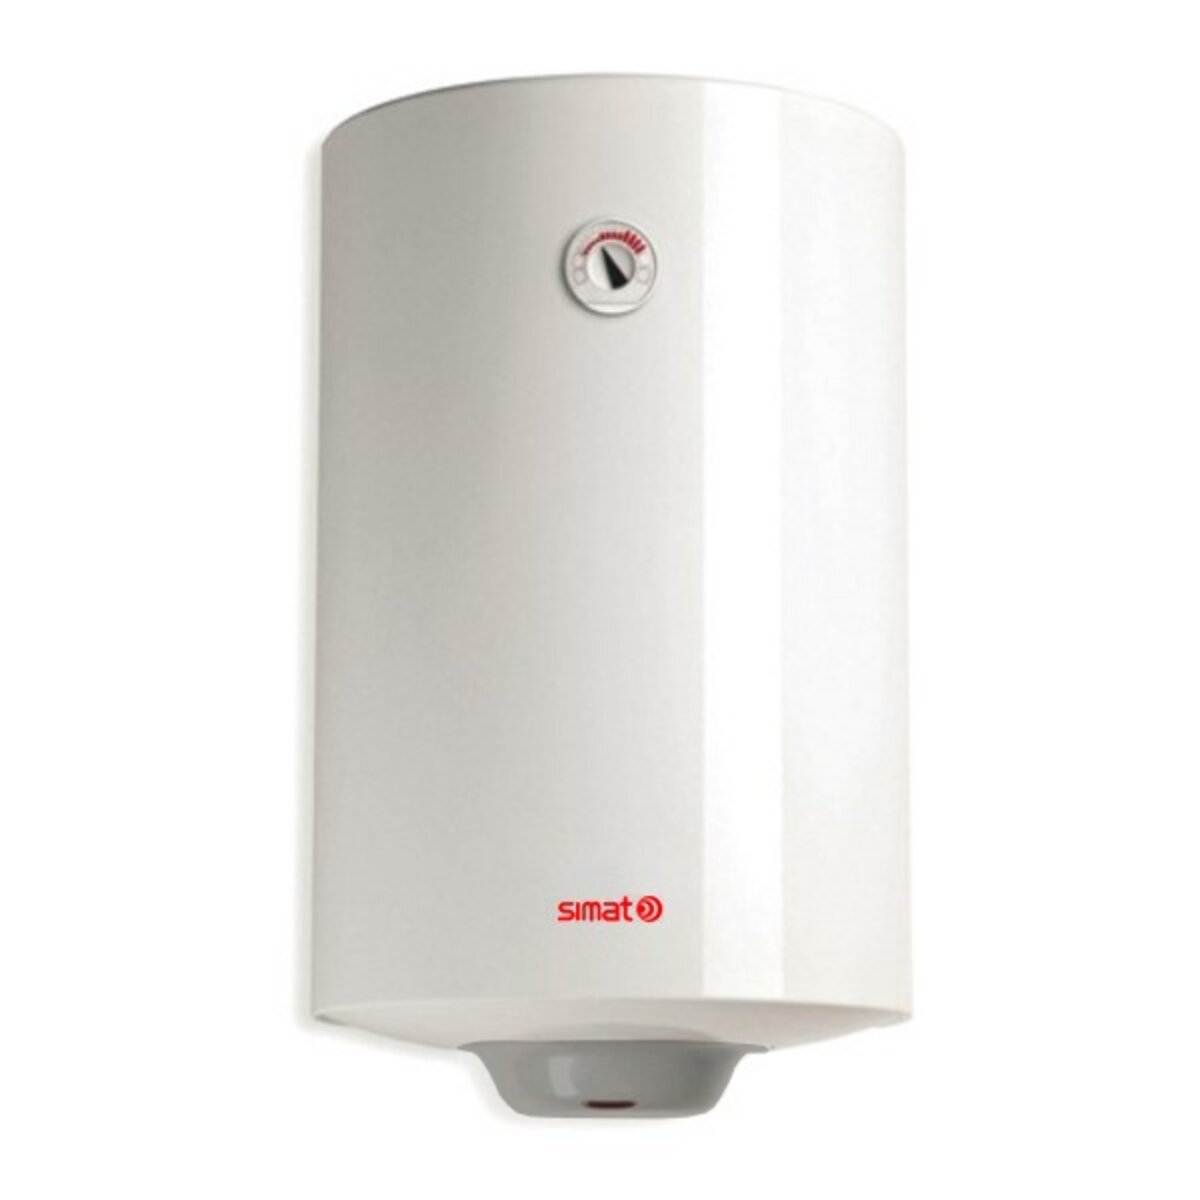 Simat by Ariston 80 VRTD/2 EU2 thermoelectric water heater - 75 liters vertical connections on the right